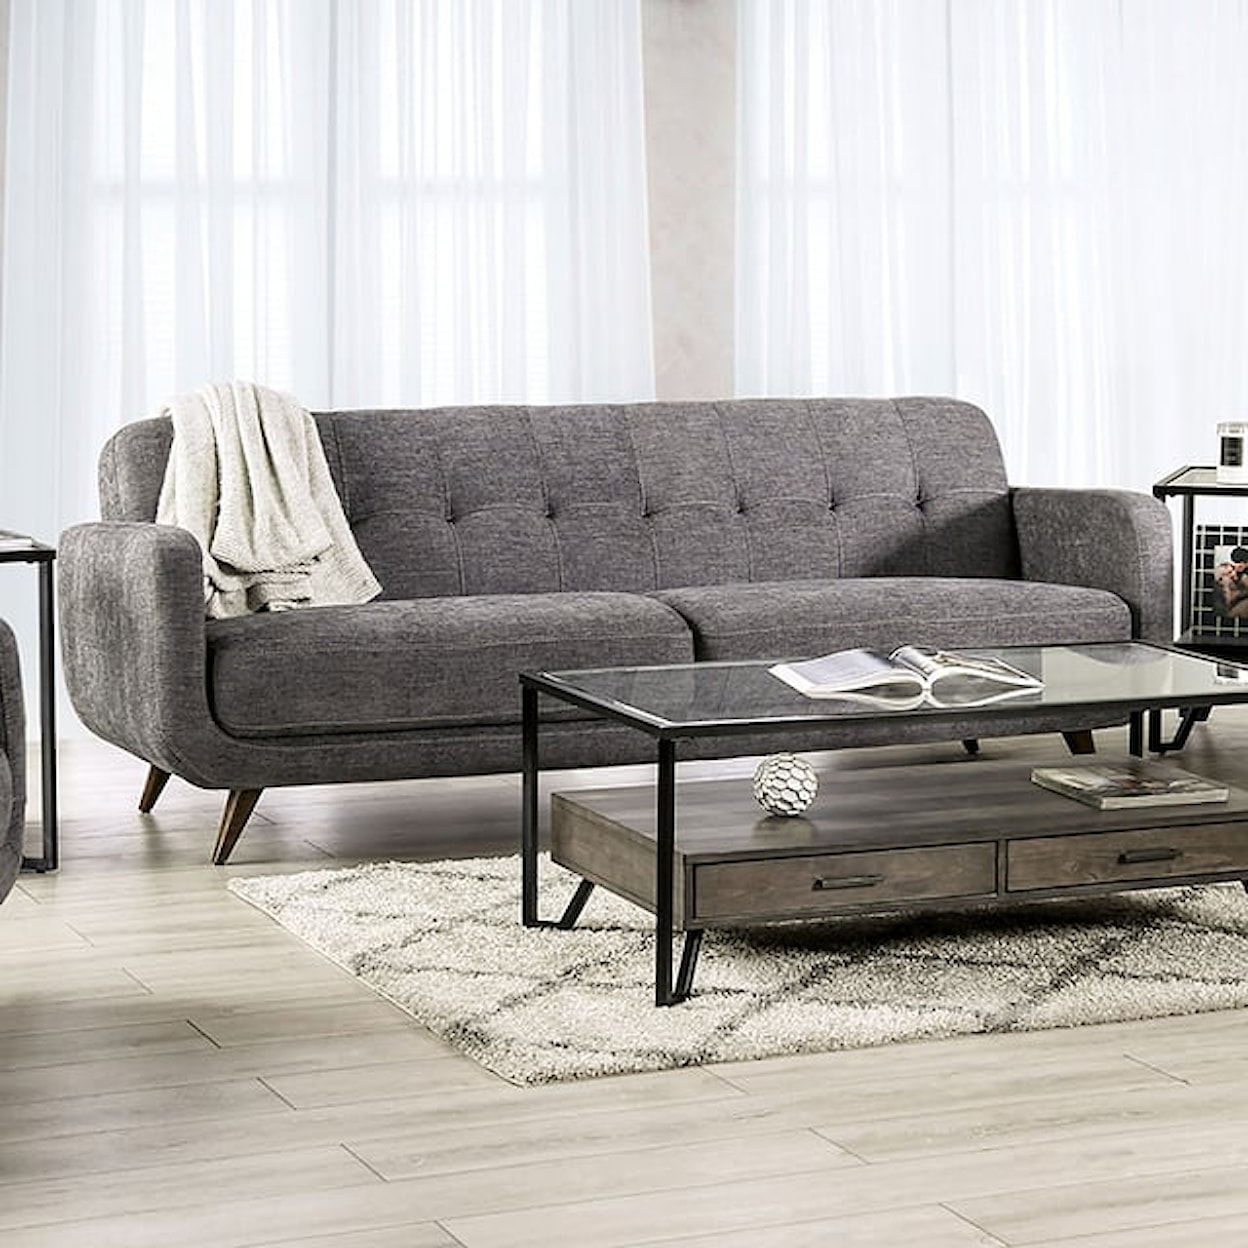 Furniture of America Siegen Sofa with Biscuit-Tufting